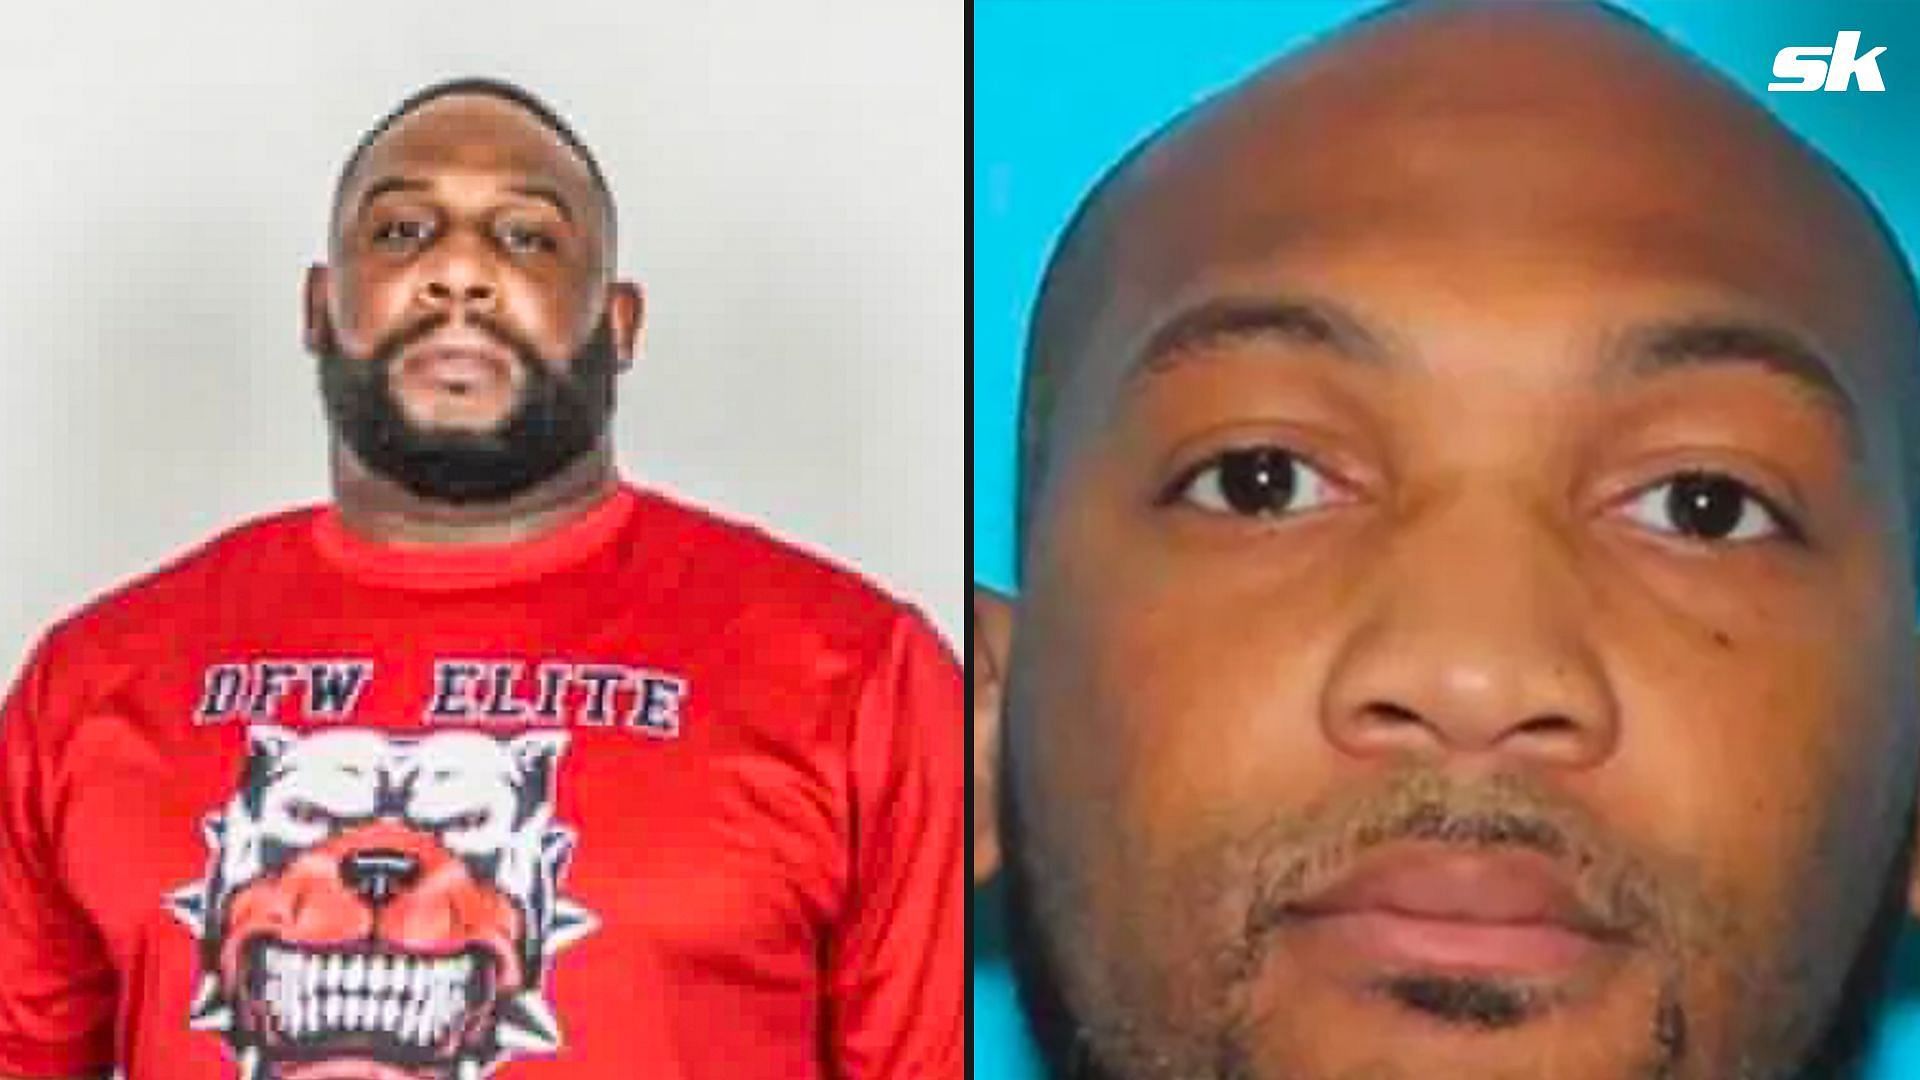 Yaqub Talib is wanted for the shooting of a youth football coach